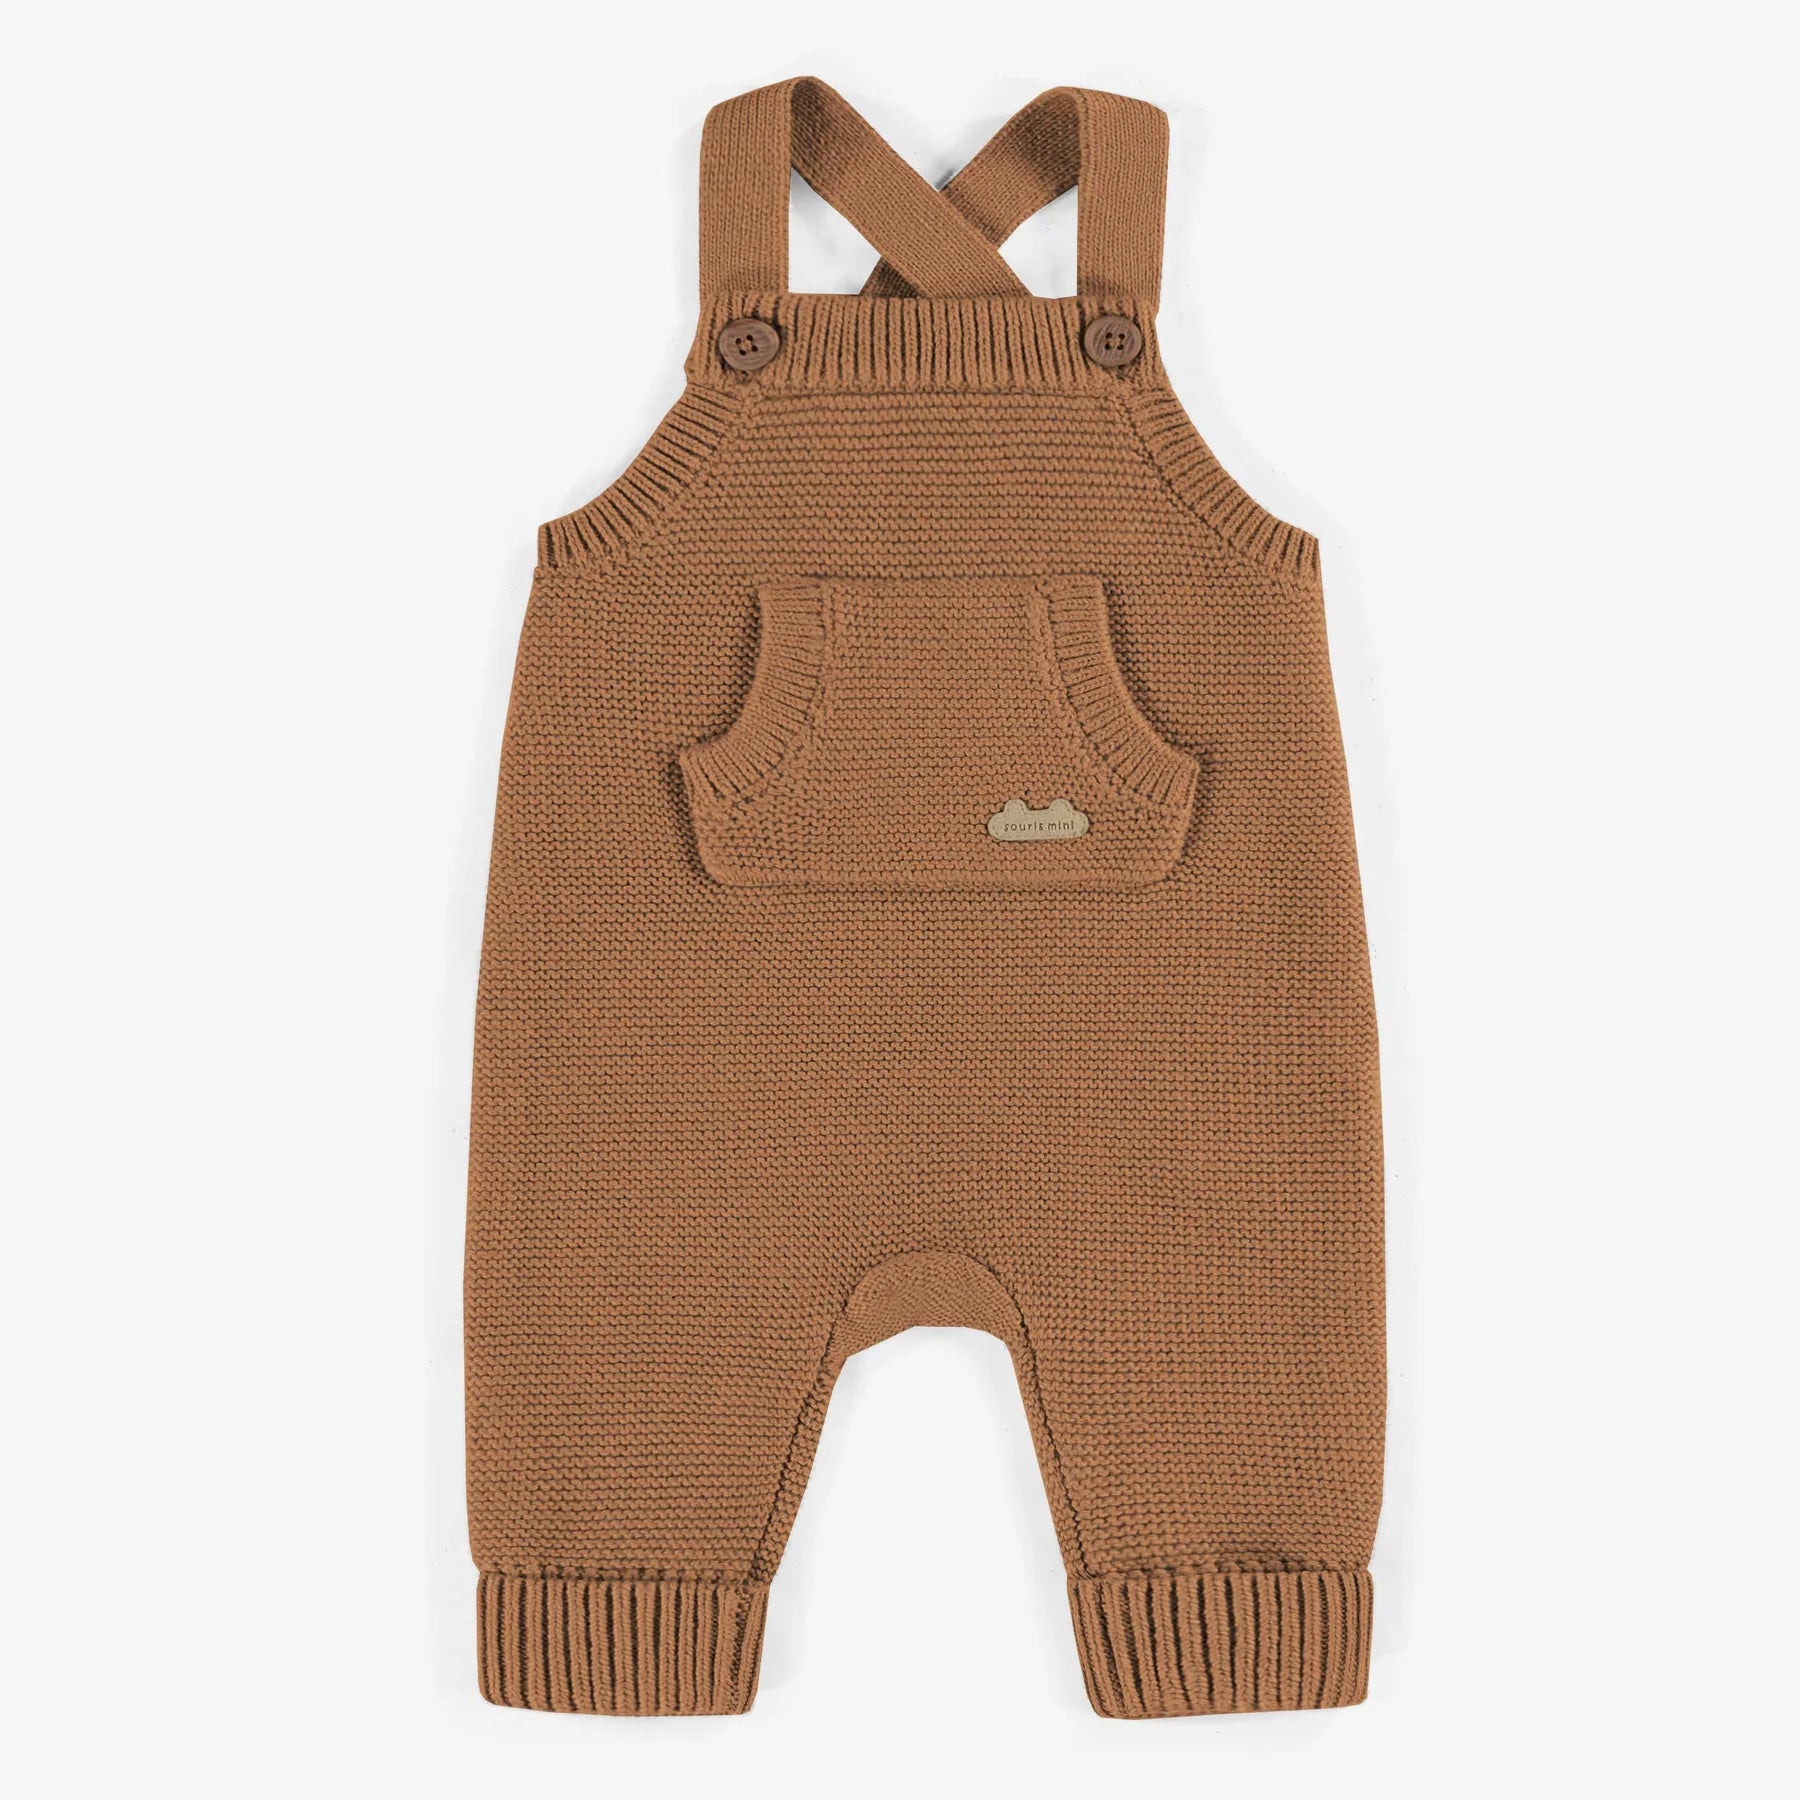 brown knit baby overalls, brown overalls baby